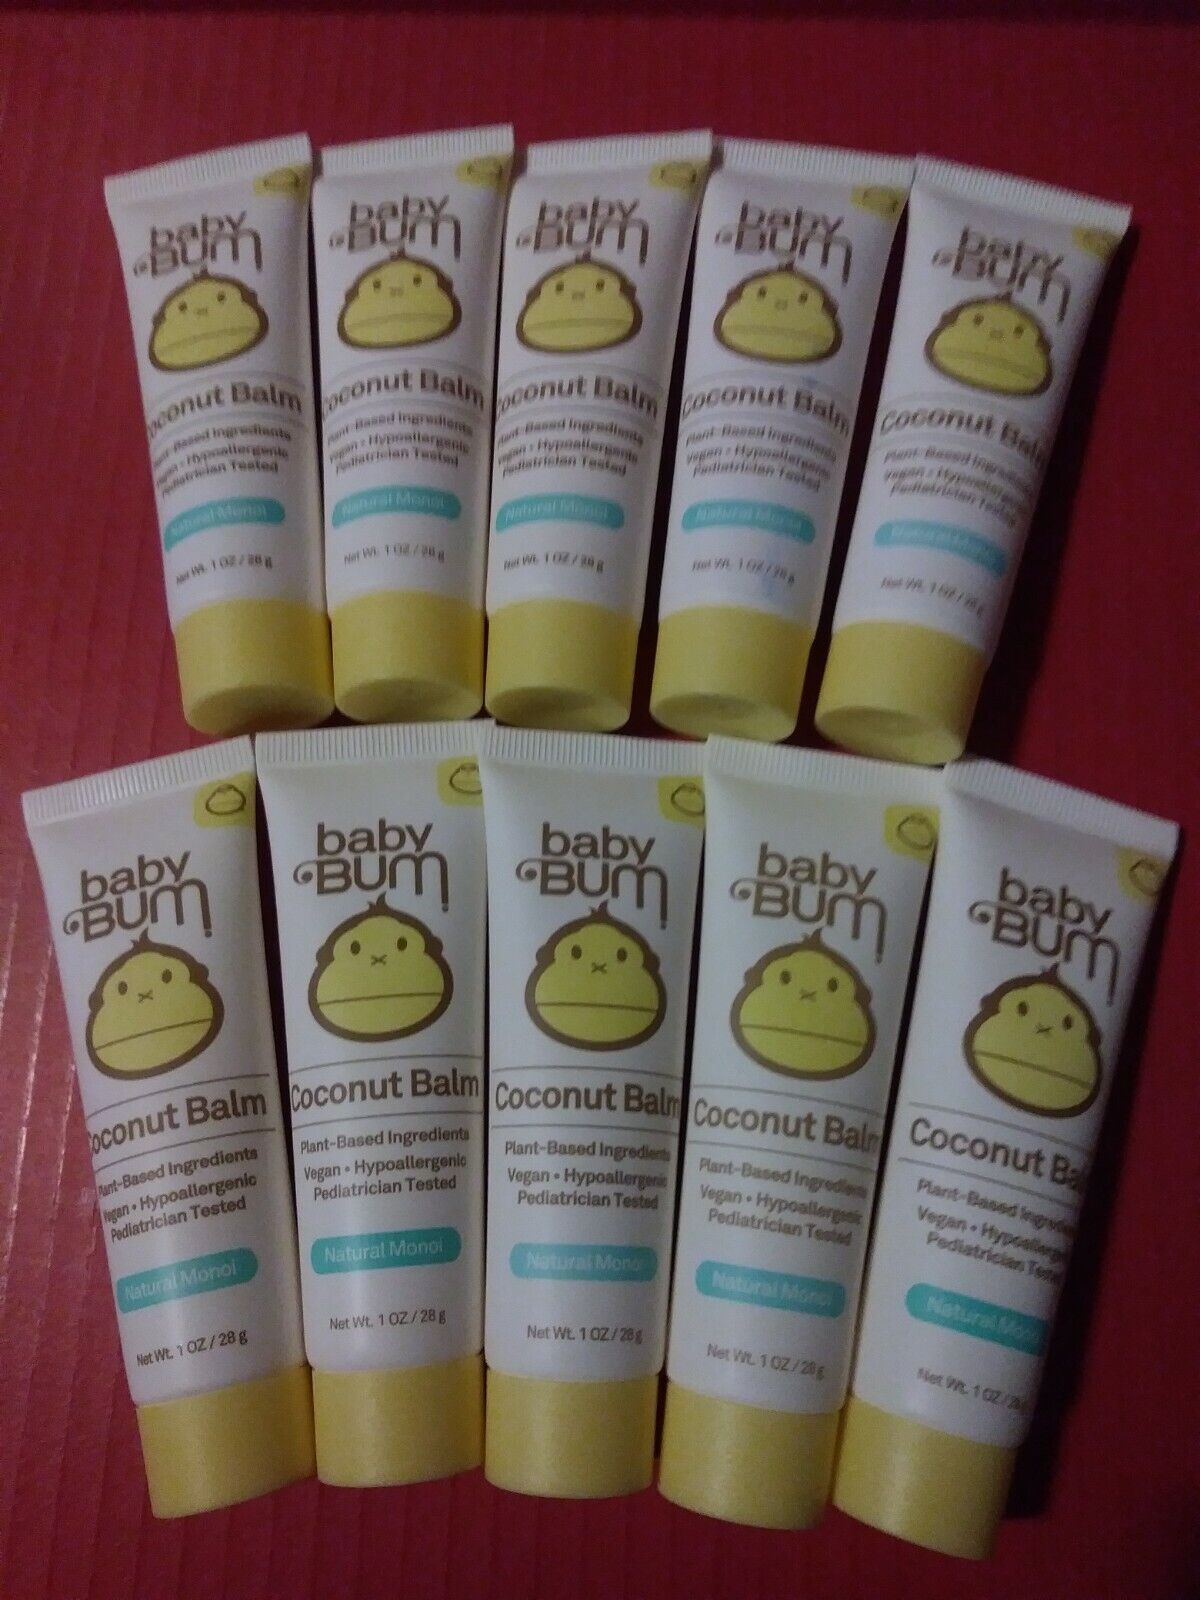 Baby Bum Coconut Balm Natural Monoi - Lot of 10 1oz Tubes - While Supplies Last Baby Bum